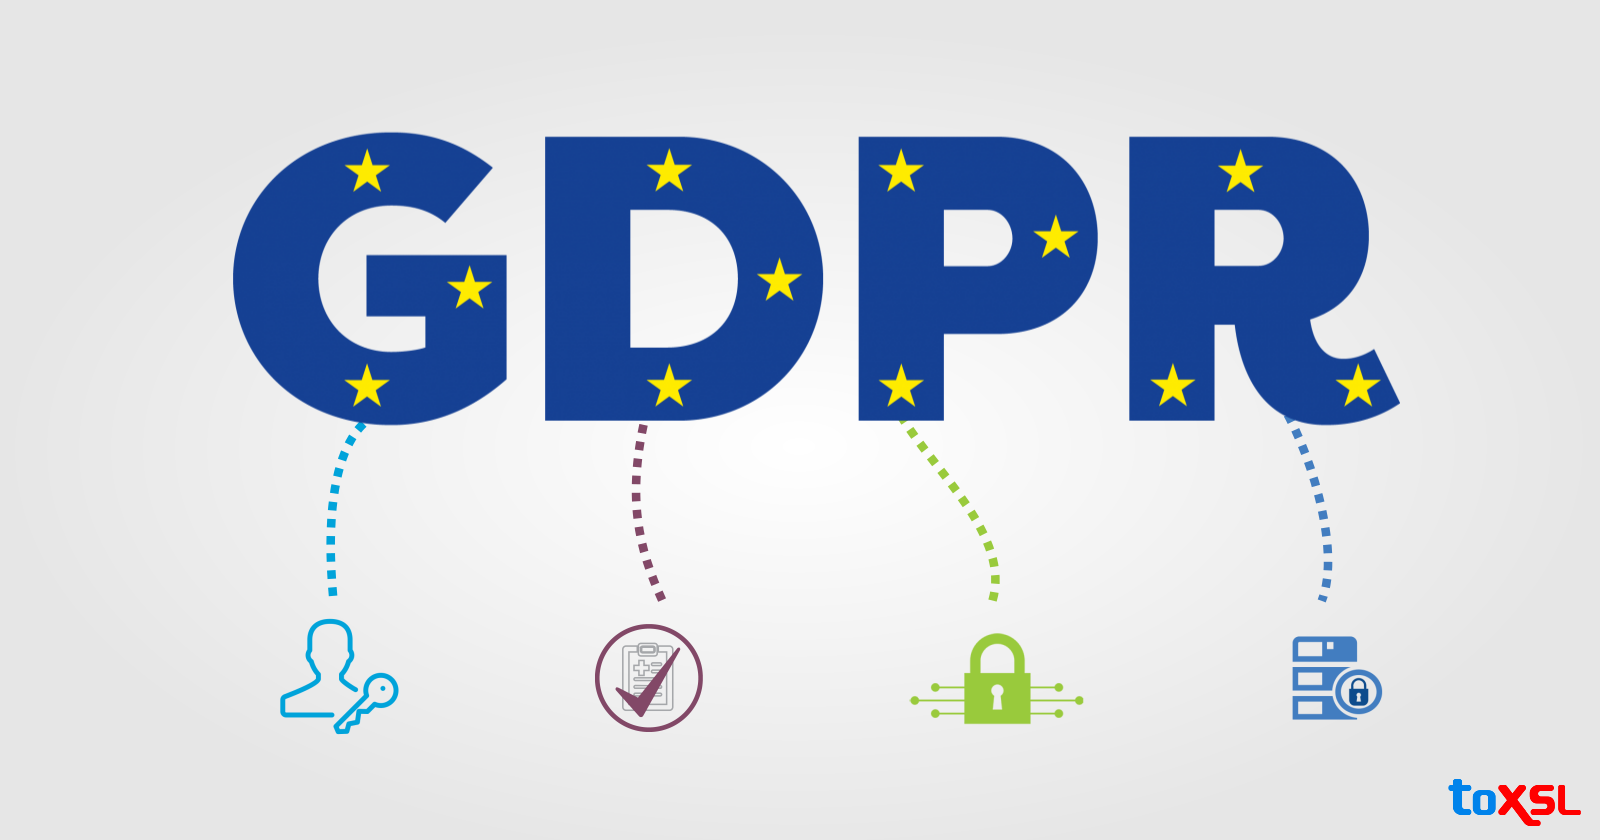 Immediate Modifications to Make Your Website GDPR compliant